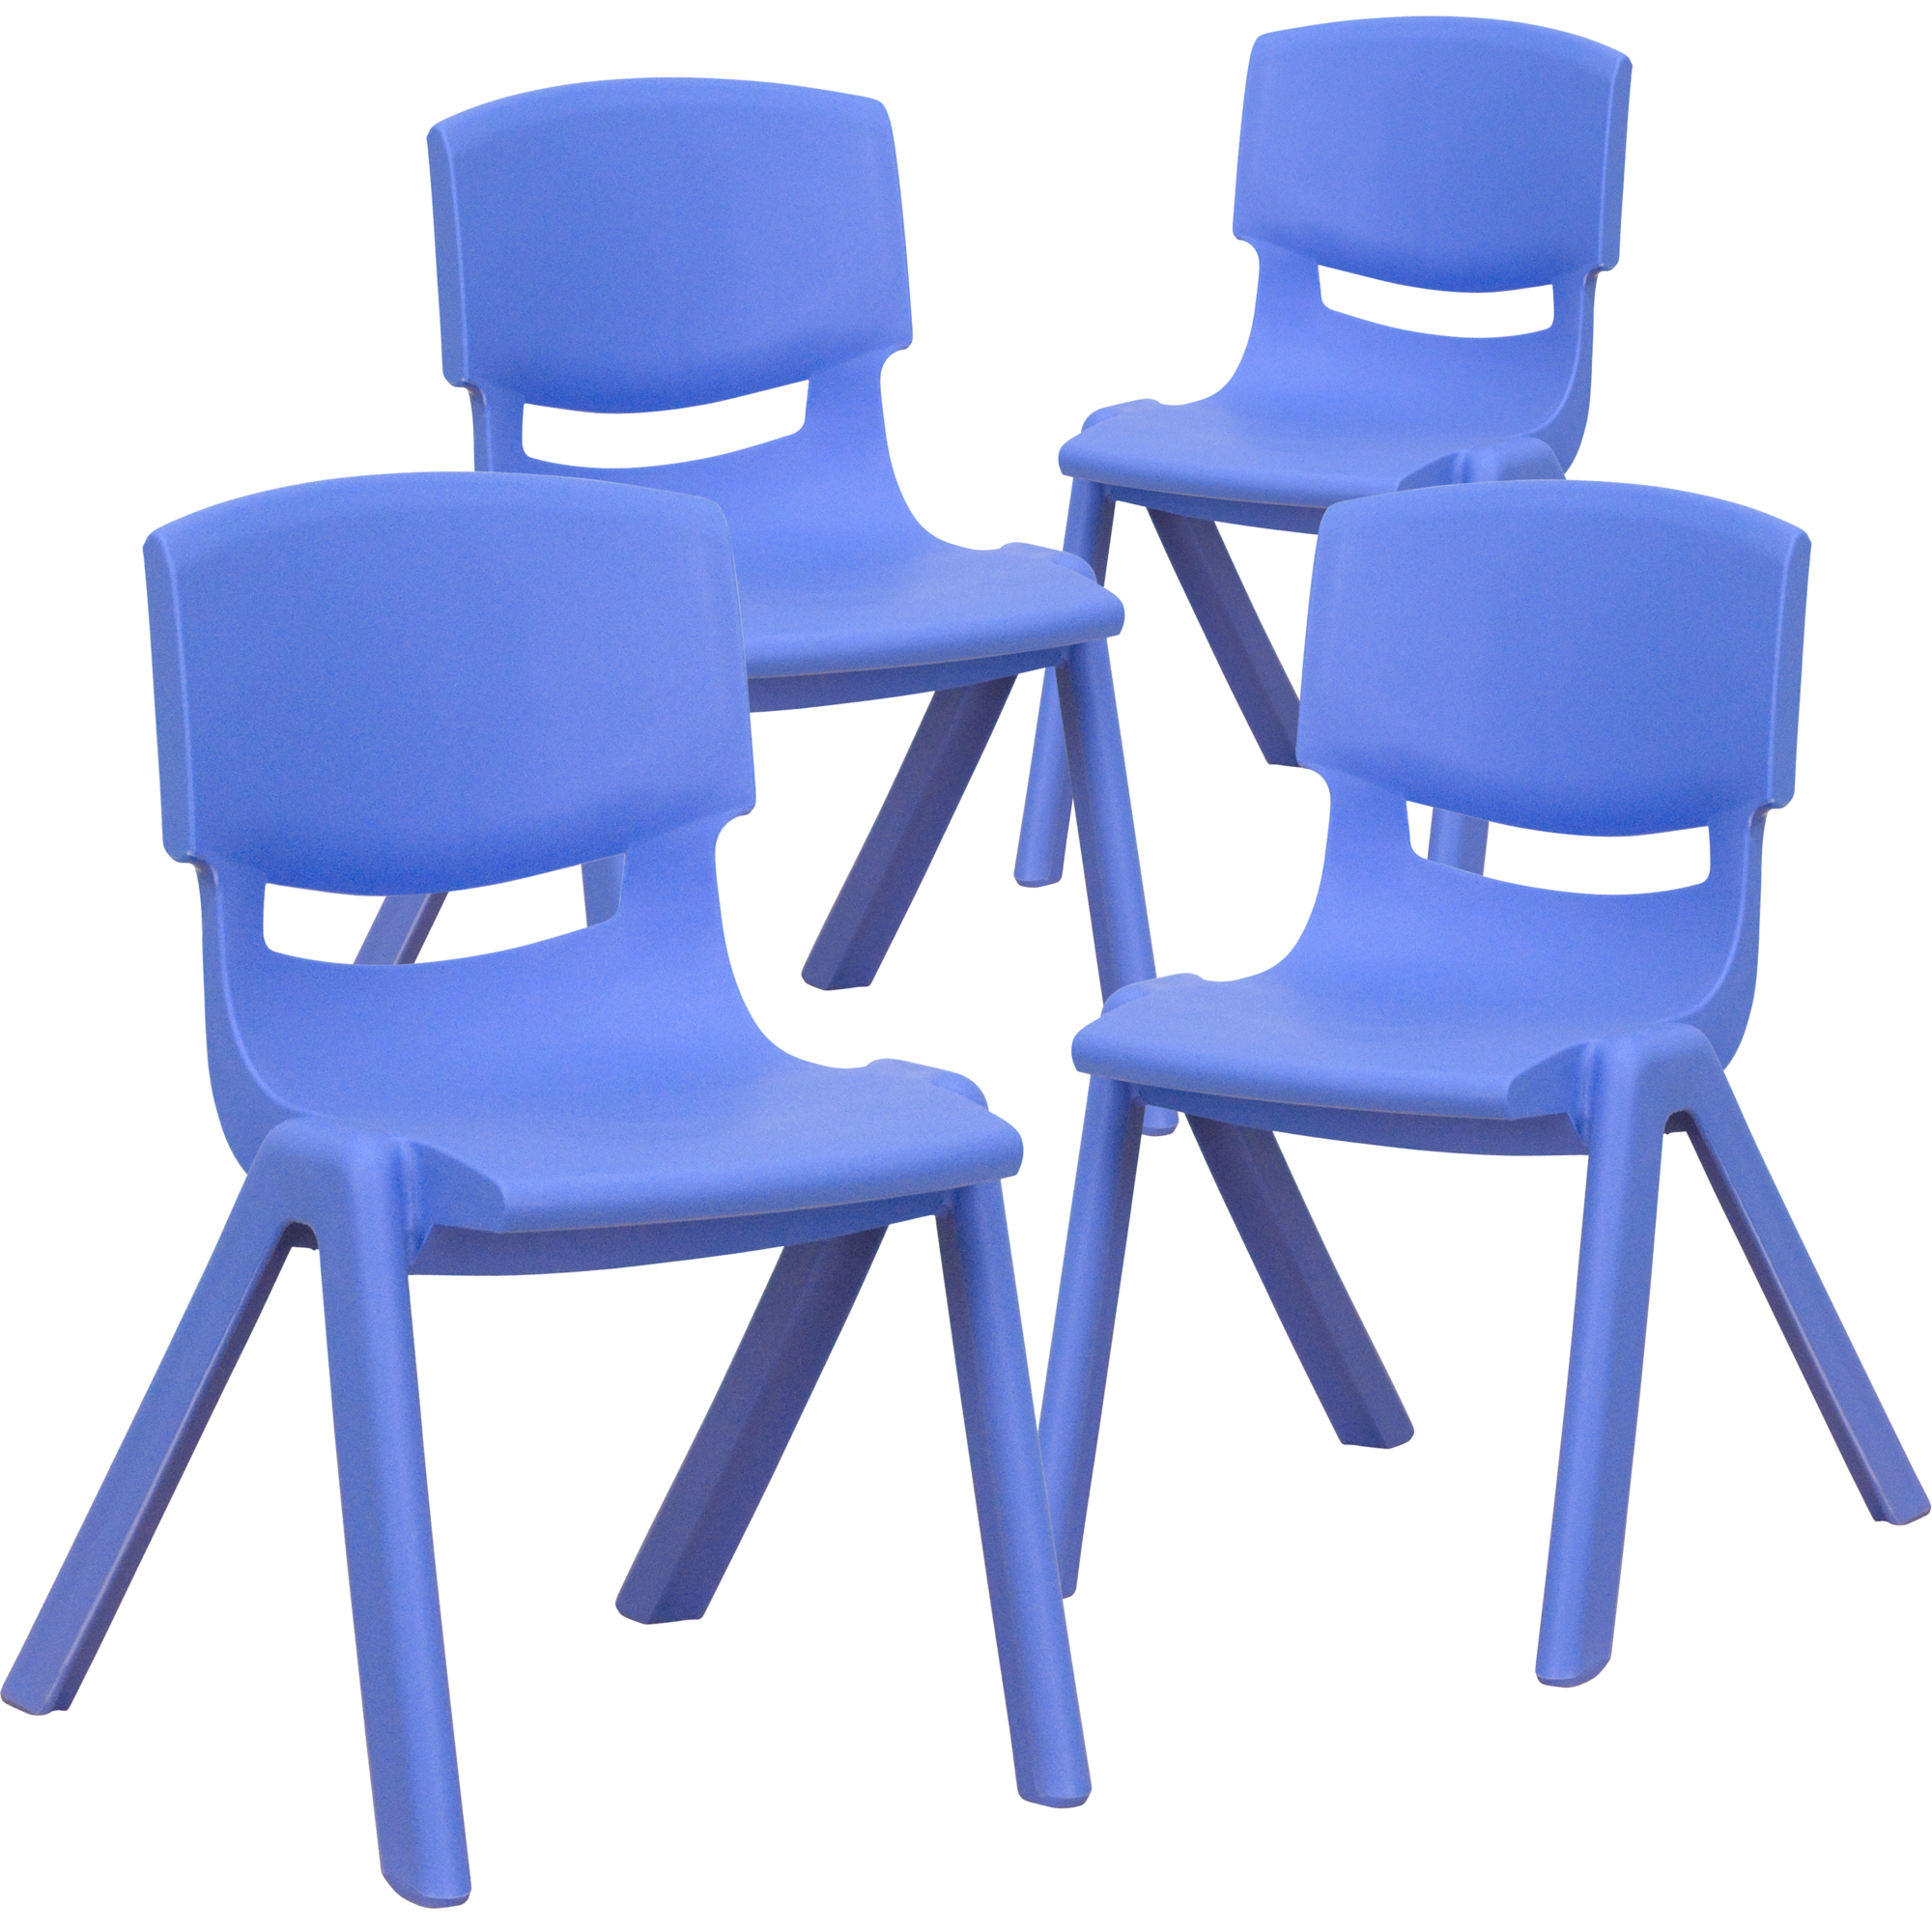 Flash Furniture, 4 Pack Blue Plastic School Chair-12Inch H Seat, Primary Color Blue, Included (qty.) 4, Model 4YUYCX4001BLUE